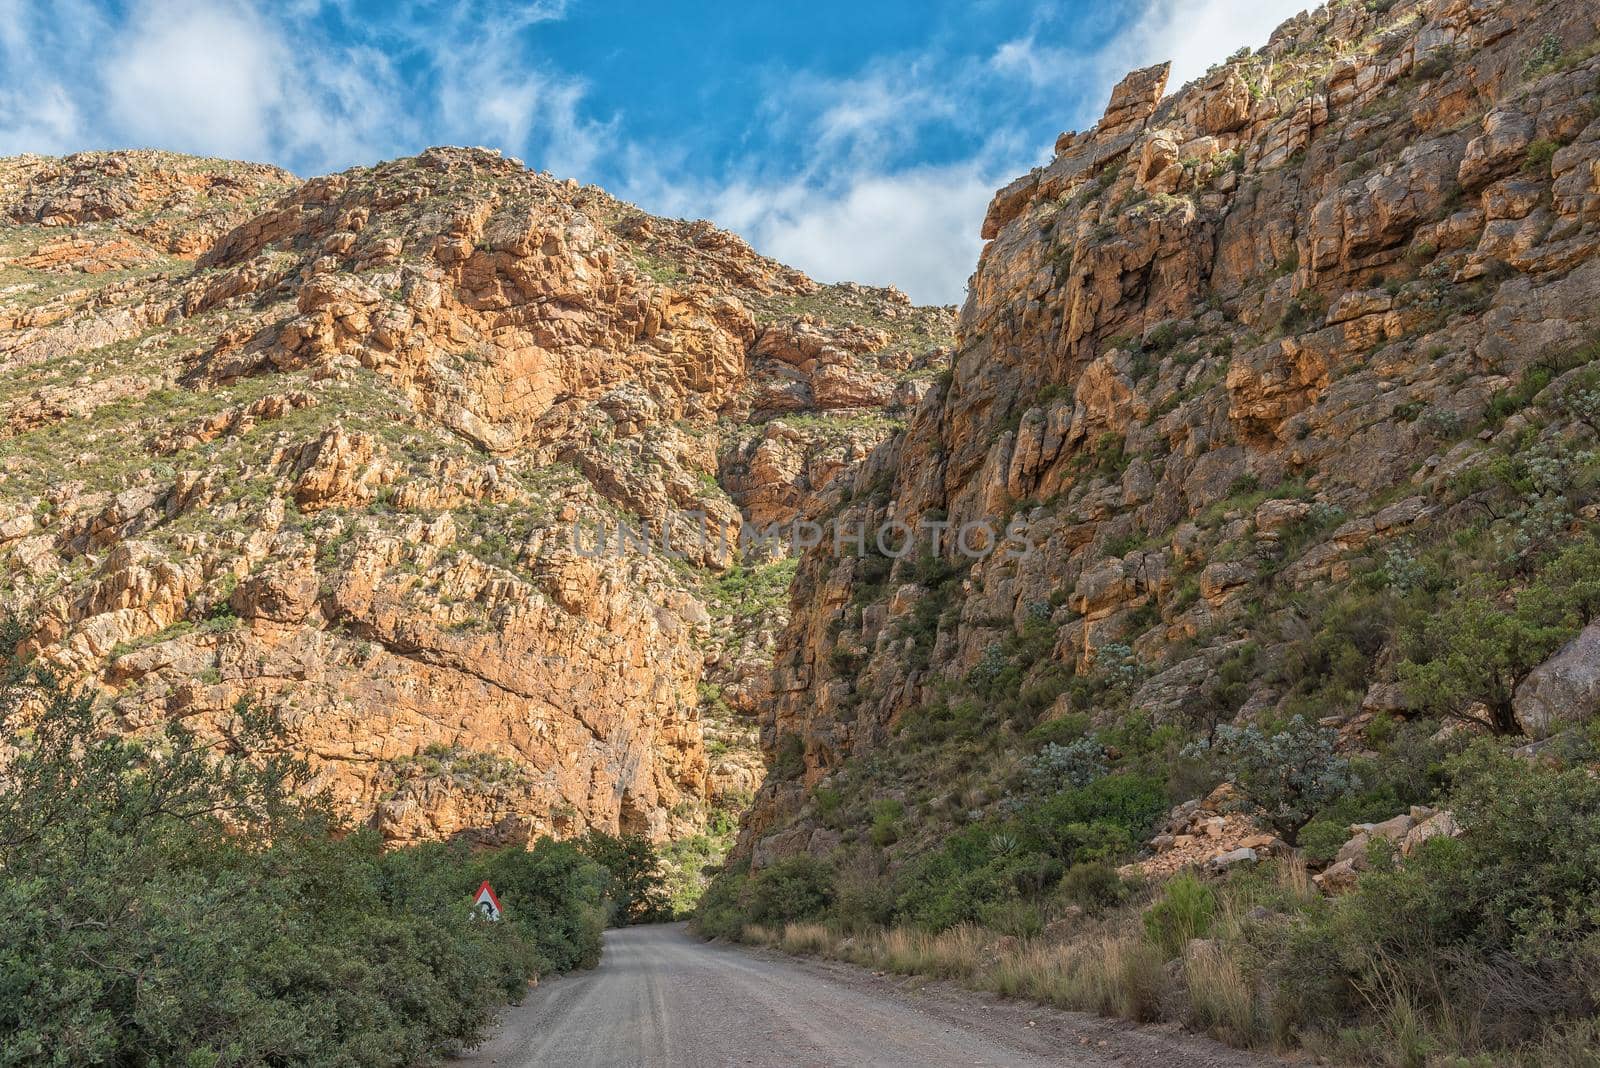 Road through Seweweekspoort in the Swartberg mountains by dpreezg